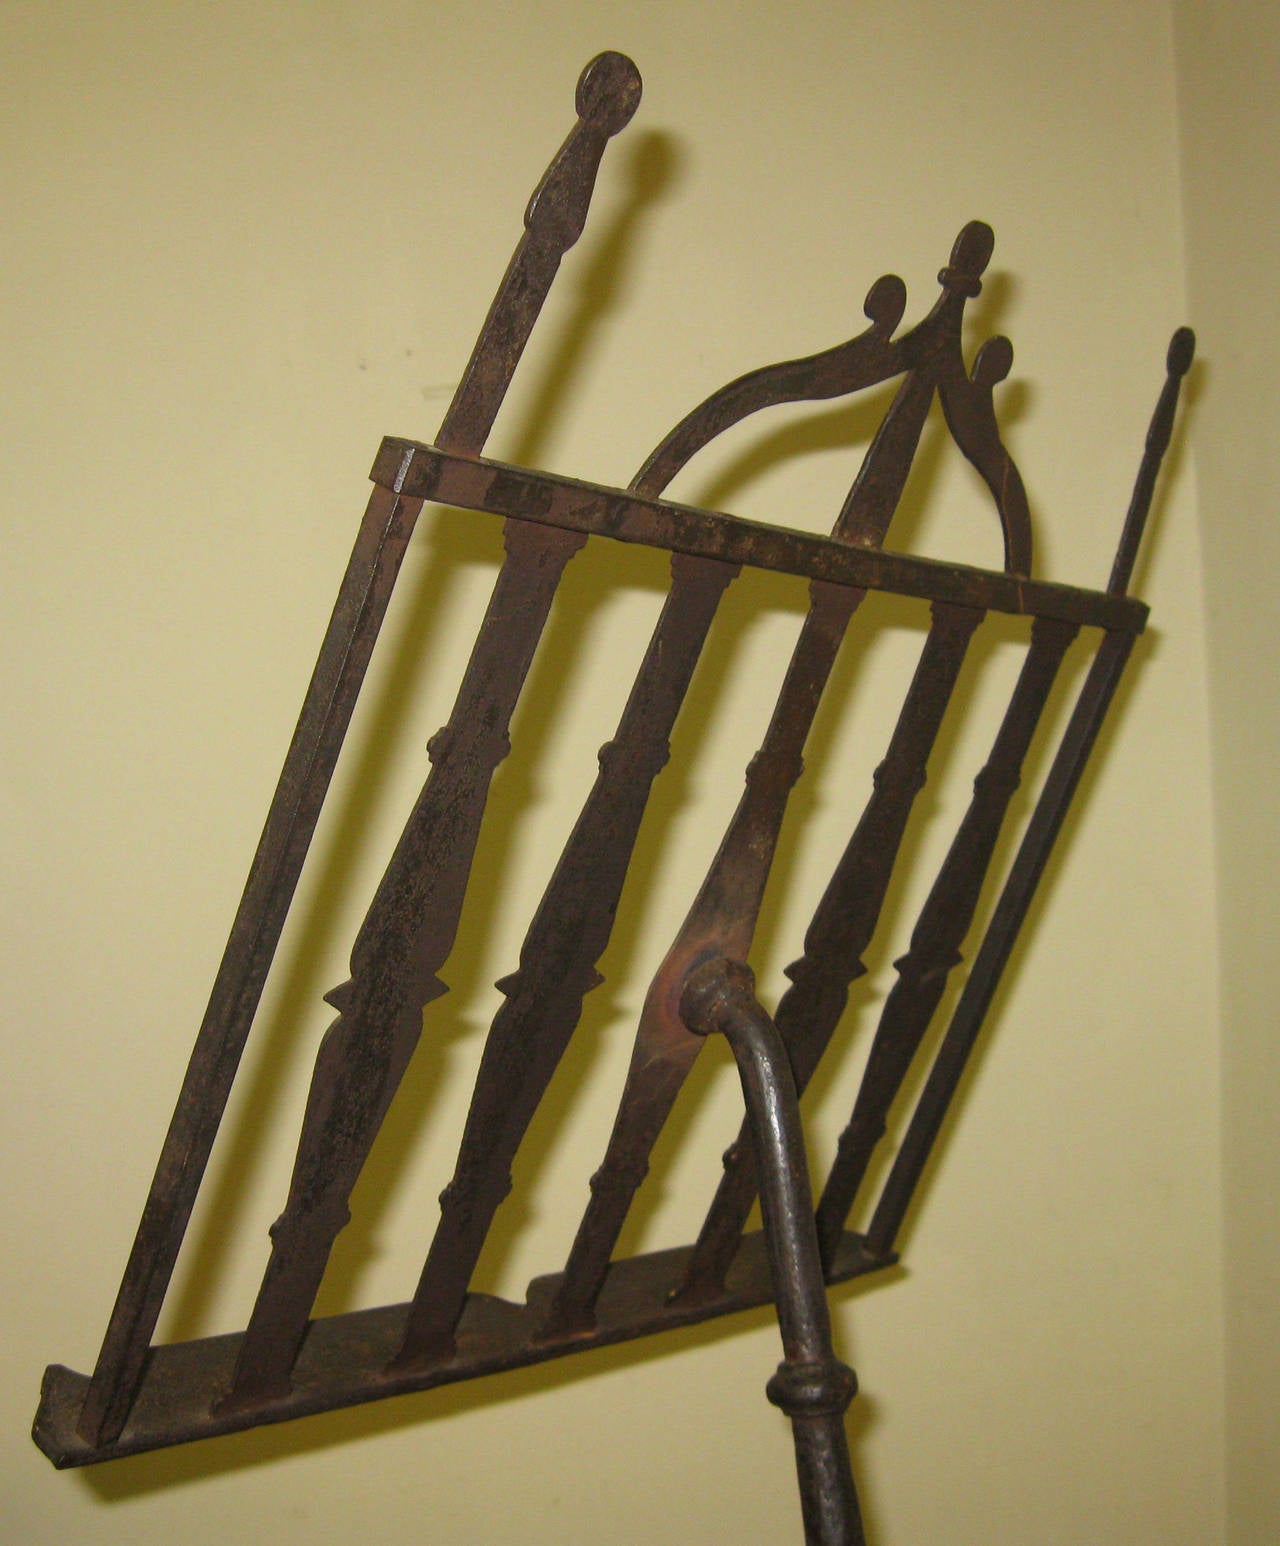 Hand forged metal antique music stand featuring an ornamental rack and tri-foot base. In a way it is primitive but there is an adjustment mechanism for the rack to go forward and back. This interesting historical piece could be used for sheet music